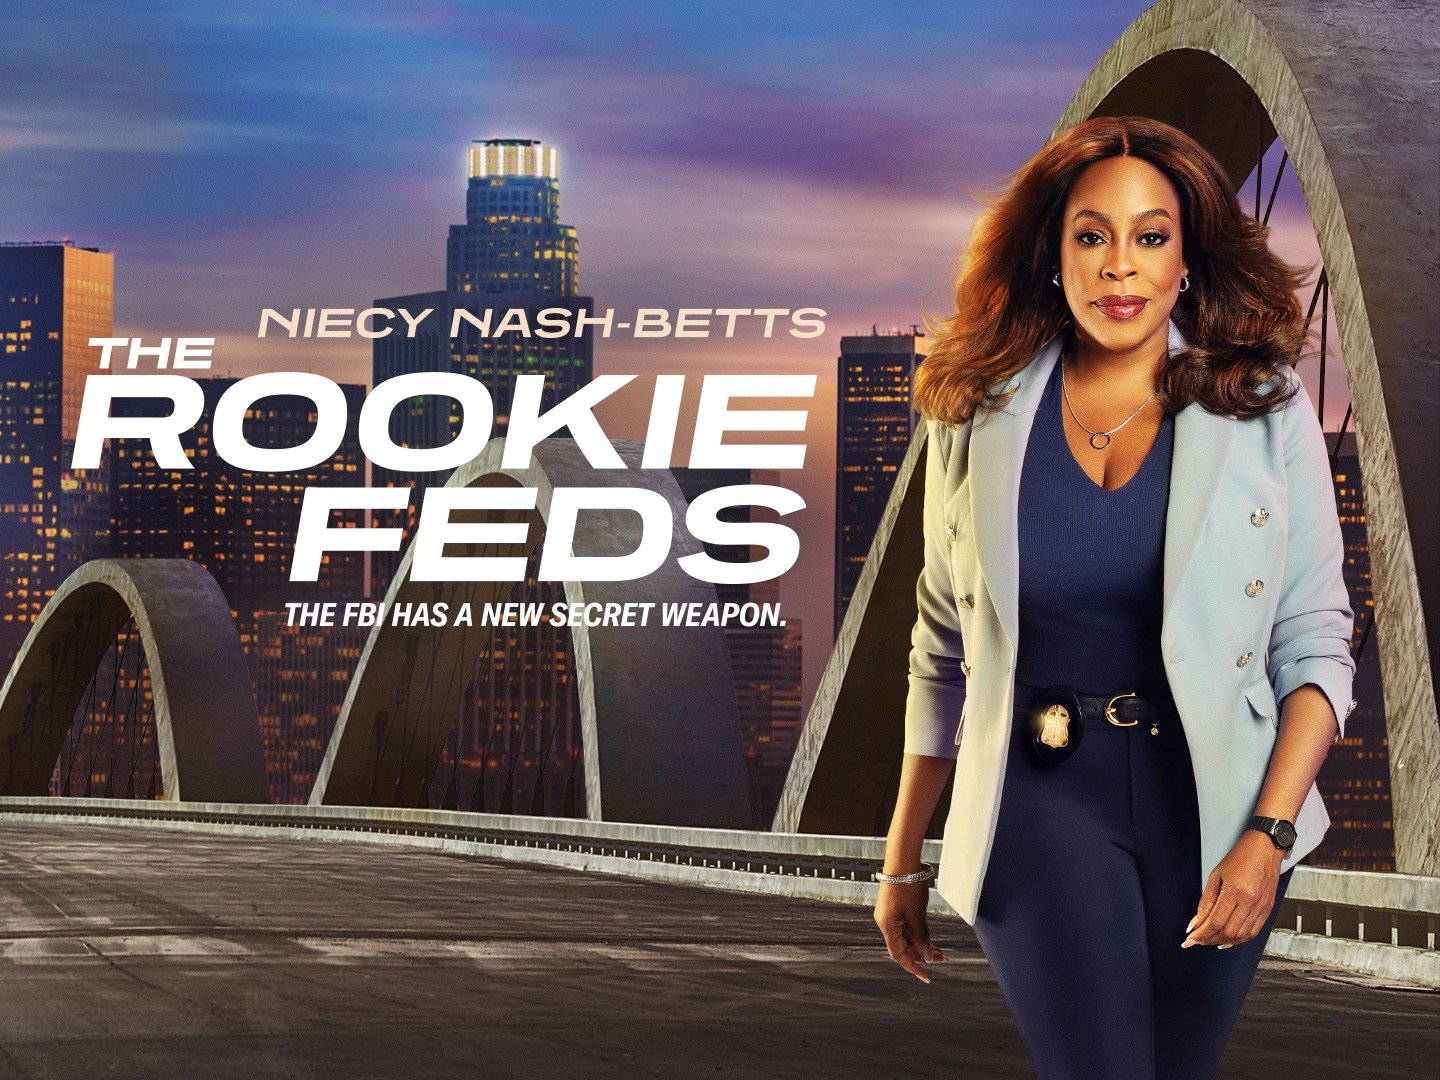 The Rookie Feds Season 1 Trailer Rotten Tomatoes